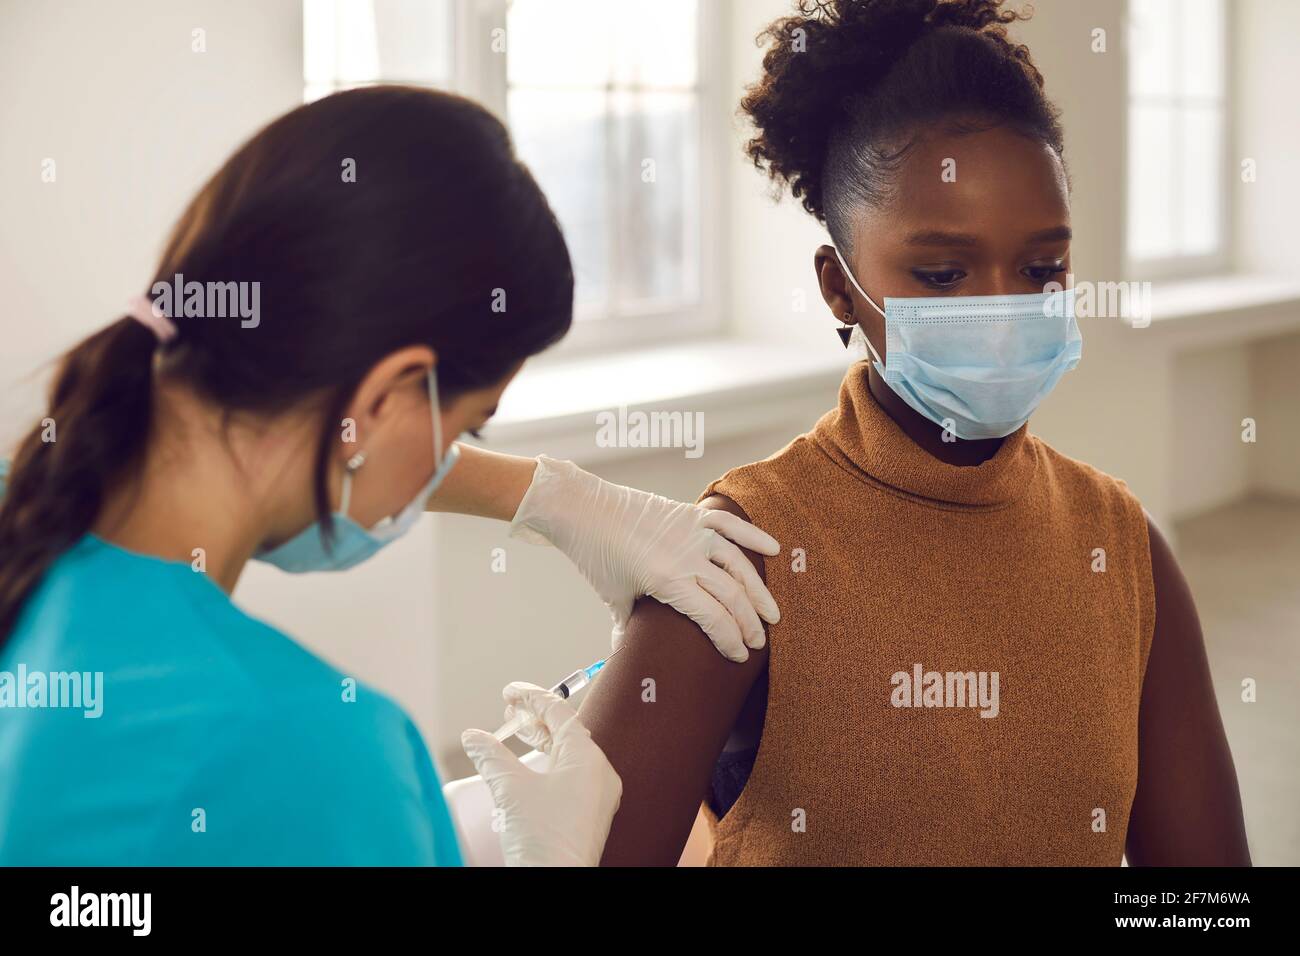 African american woman patient in protective face mask sitting getting vaccination injection Stock Photo